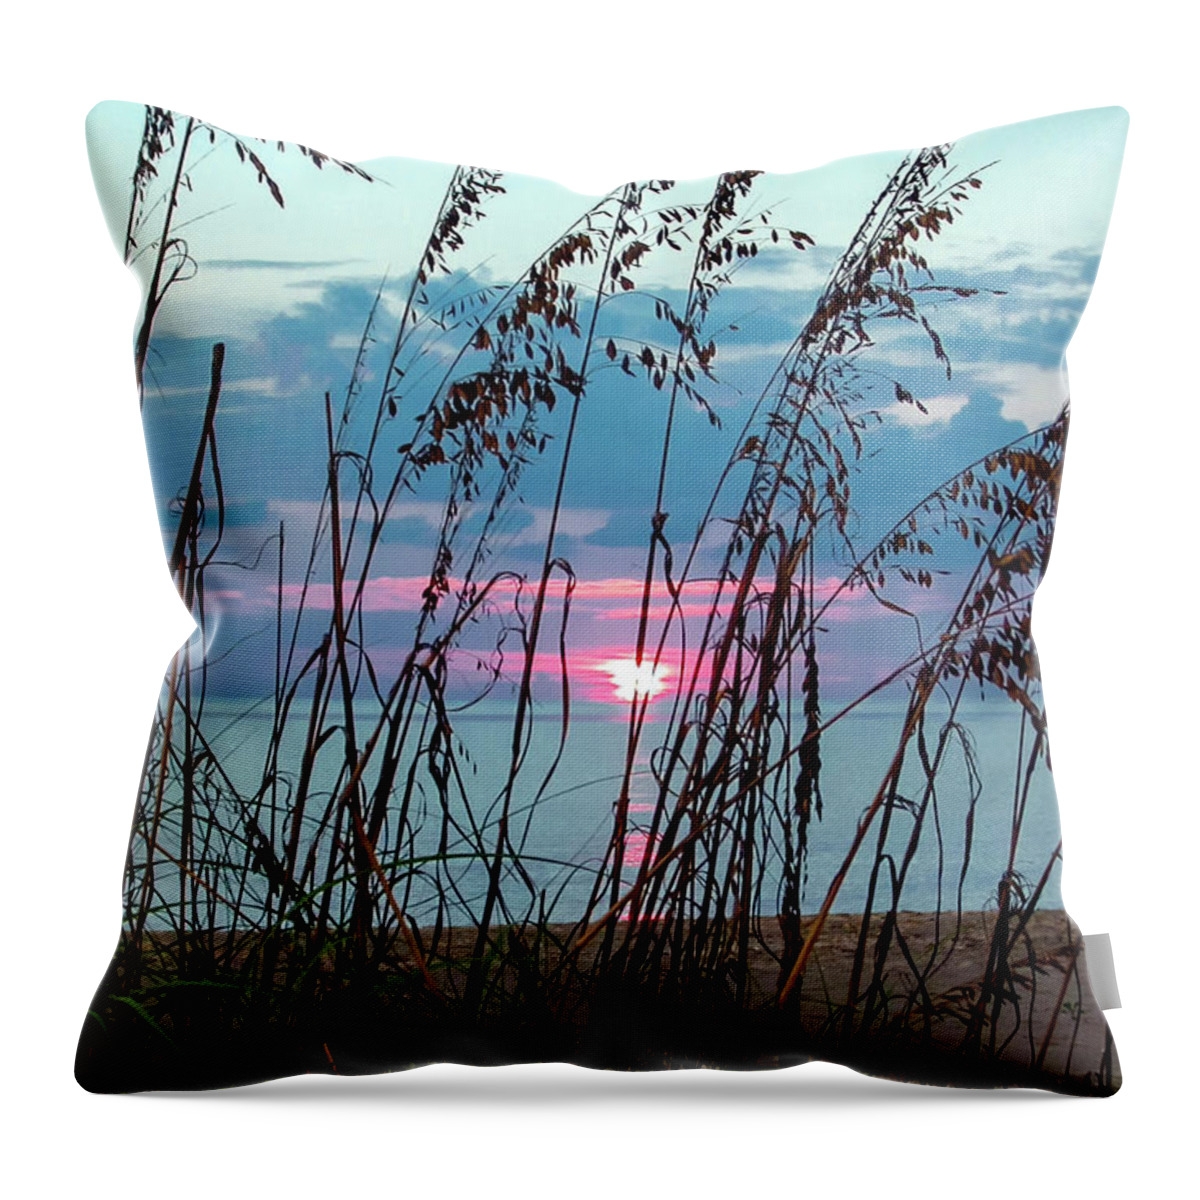 Photo For Sale Throw Pillow featuring the photograph Pink Sea Oat Sunset by Robert Wilder Jr